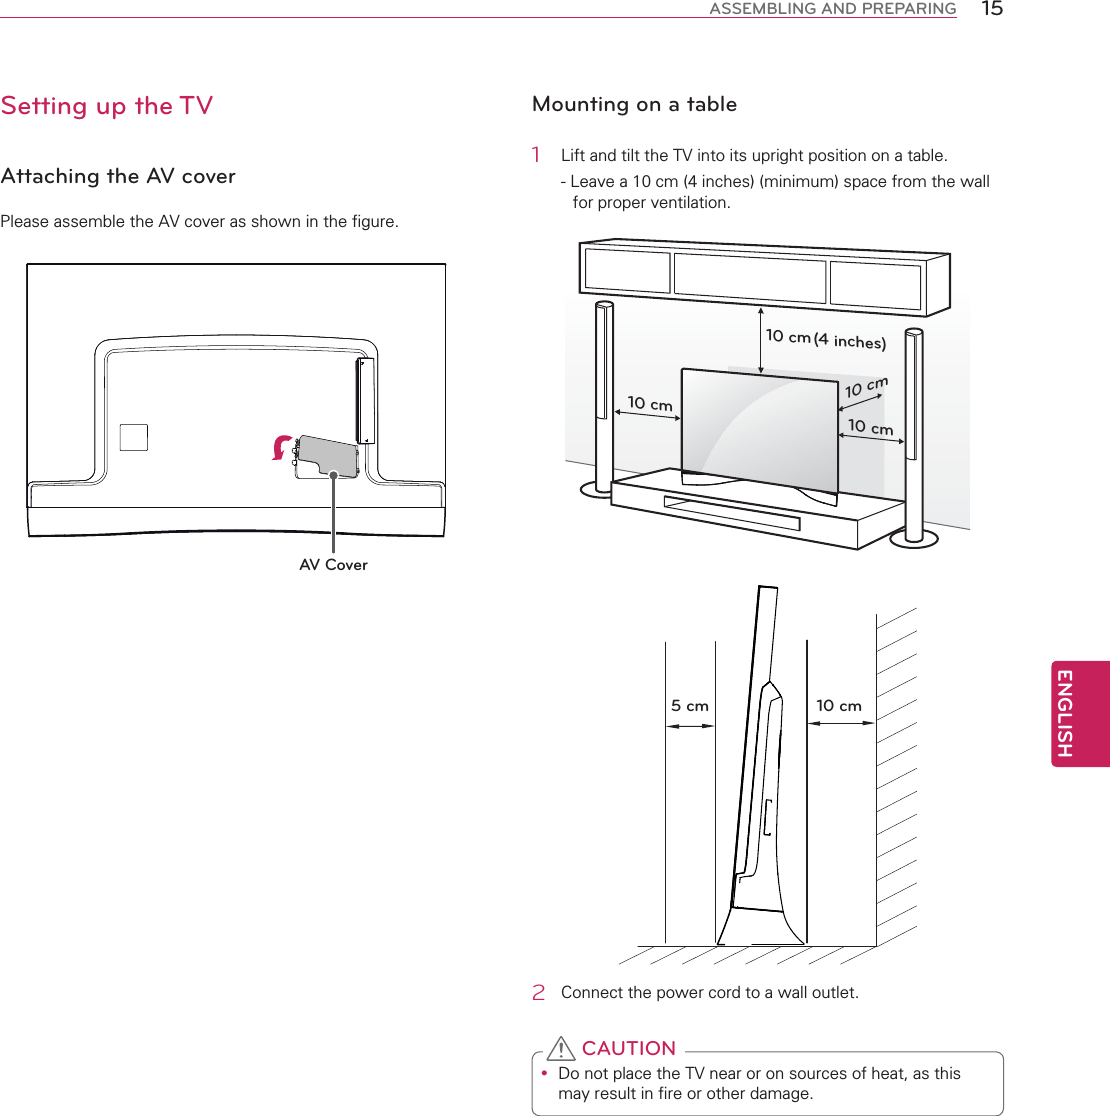 ENGLISH15ASSEMBLING AND PREPARINGSetting up the TVAttaching the AV coverPlease assemble the AV cover as shown in the figure.AV CoverMounting on a table1  Lift and tilt the TV into its upright position on a table.- Leave a 10 cm (4 inches) (minimum) space from the wall for proper ventilation.10 cm10 cm10 cm10 cm(4 inches)10 cm5 cm2  Connect the power cord to a wall outlet.y Do not place the TV near or on sources of heat, as this may result in fire or other damage. CAUTION